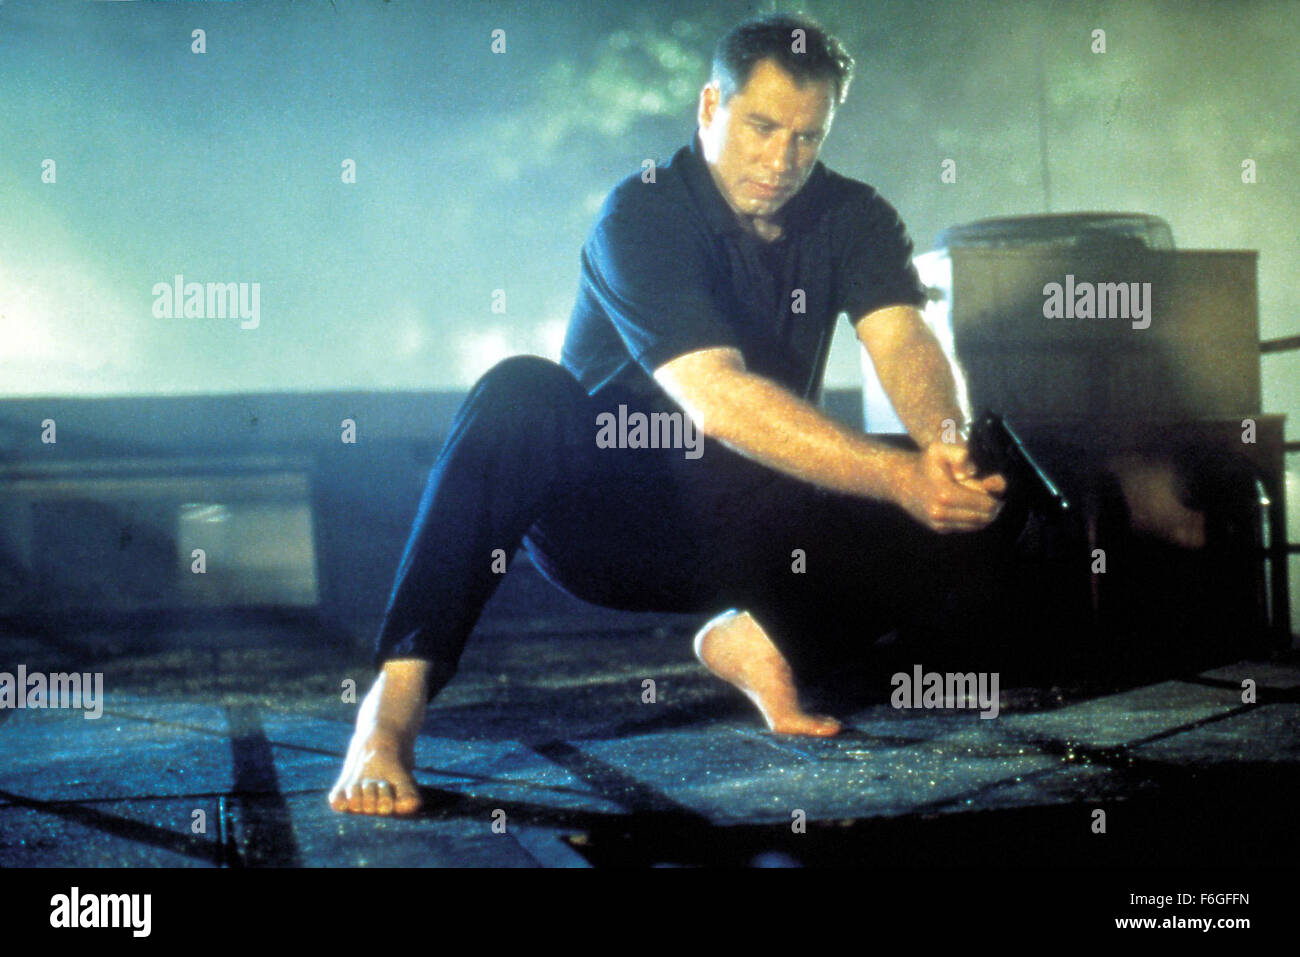 Mar 01, 1999; Hollywood, CA, USA; Image from Simon West's drama mystery 'The General's Daughter' starring JOHN TRAVOLTA as Warr. Off. Paul Brenner/Sgt. Frank White. Stock Photo